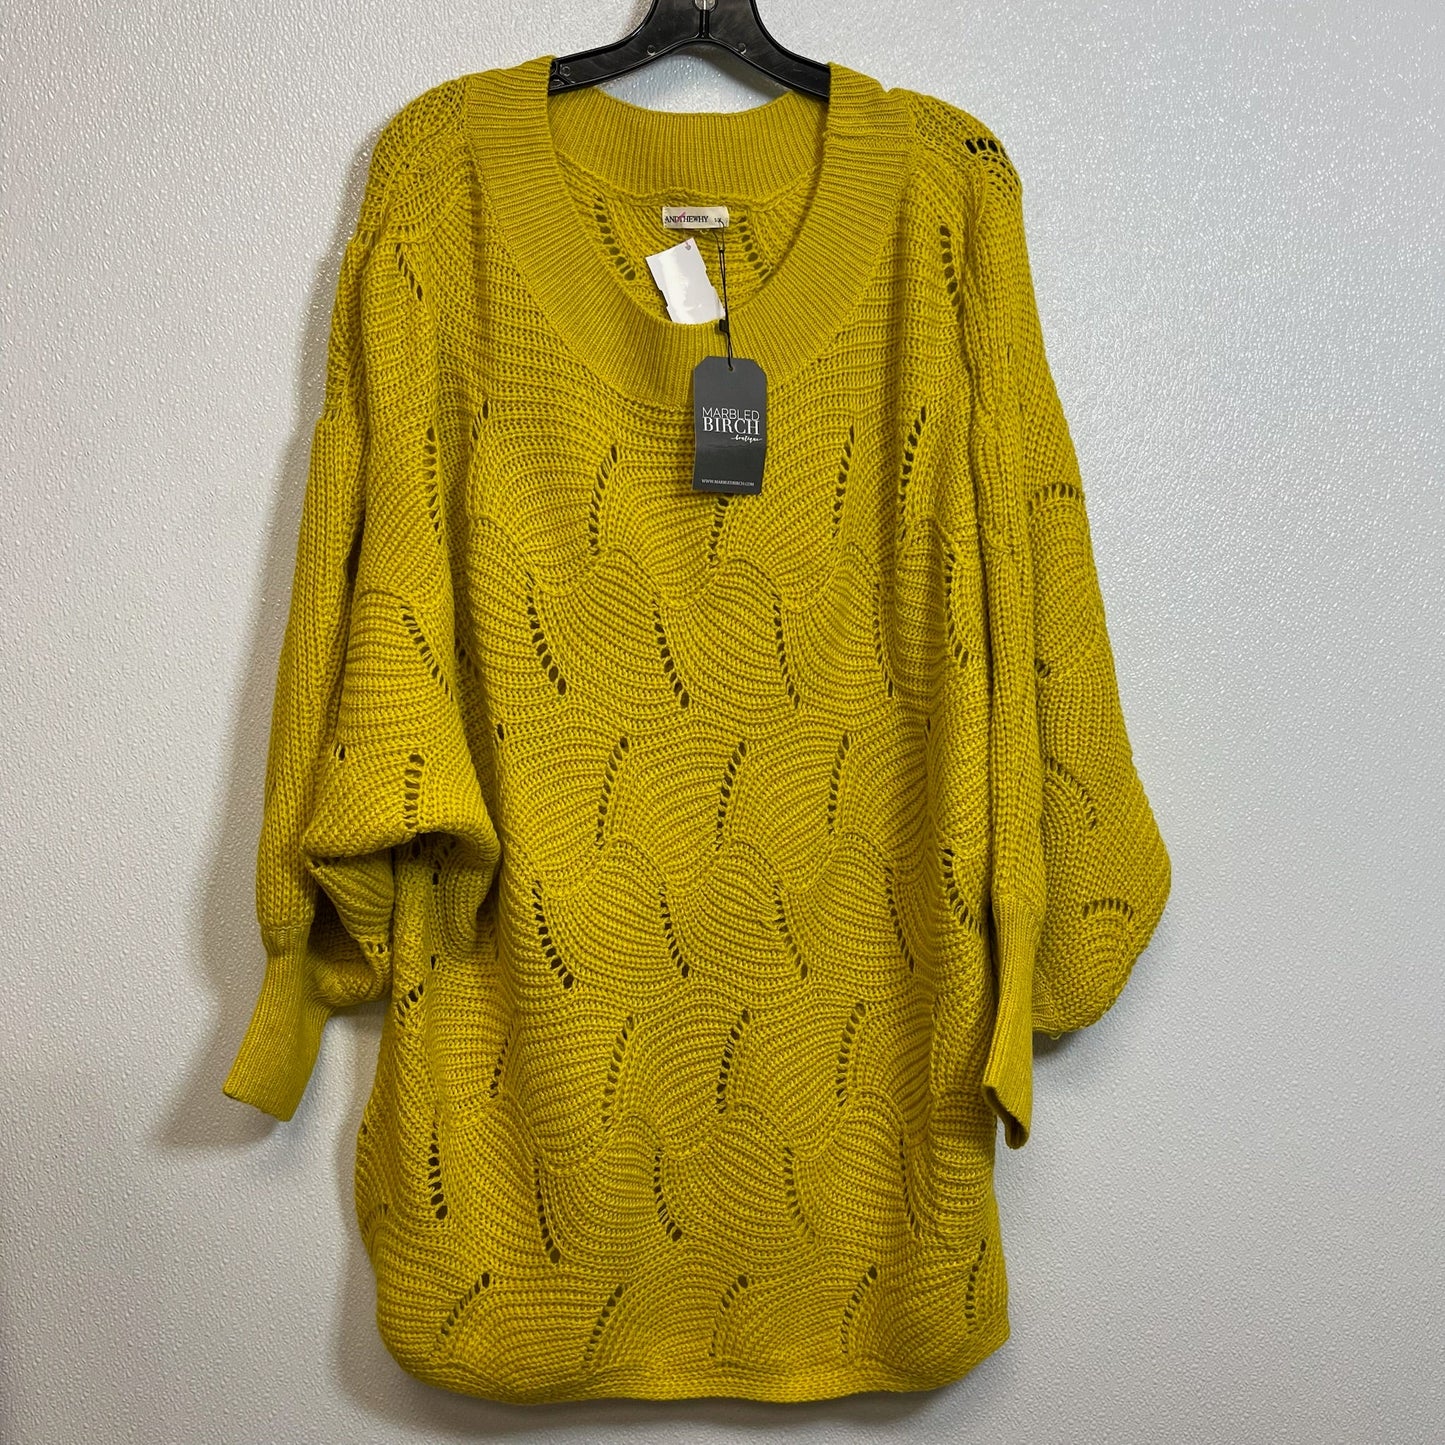 Mustard Sweater Clothes Mentor, Size S/M